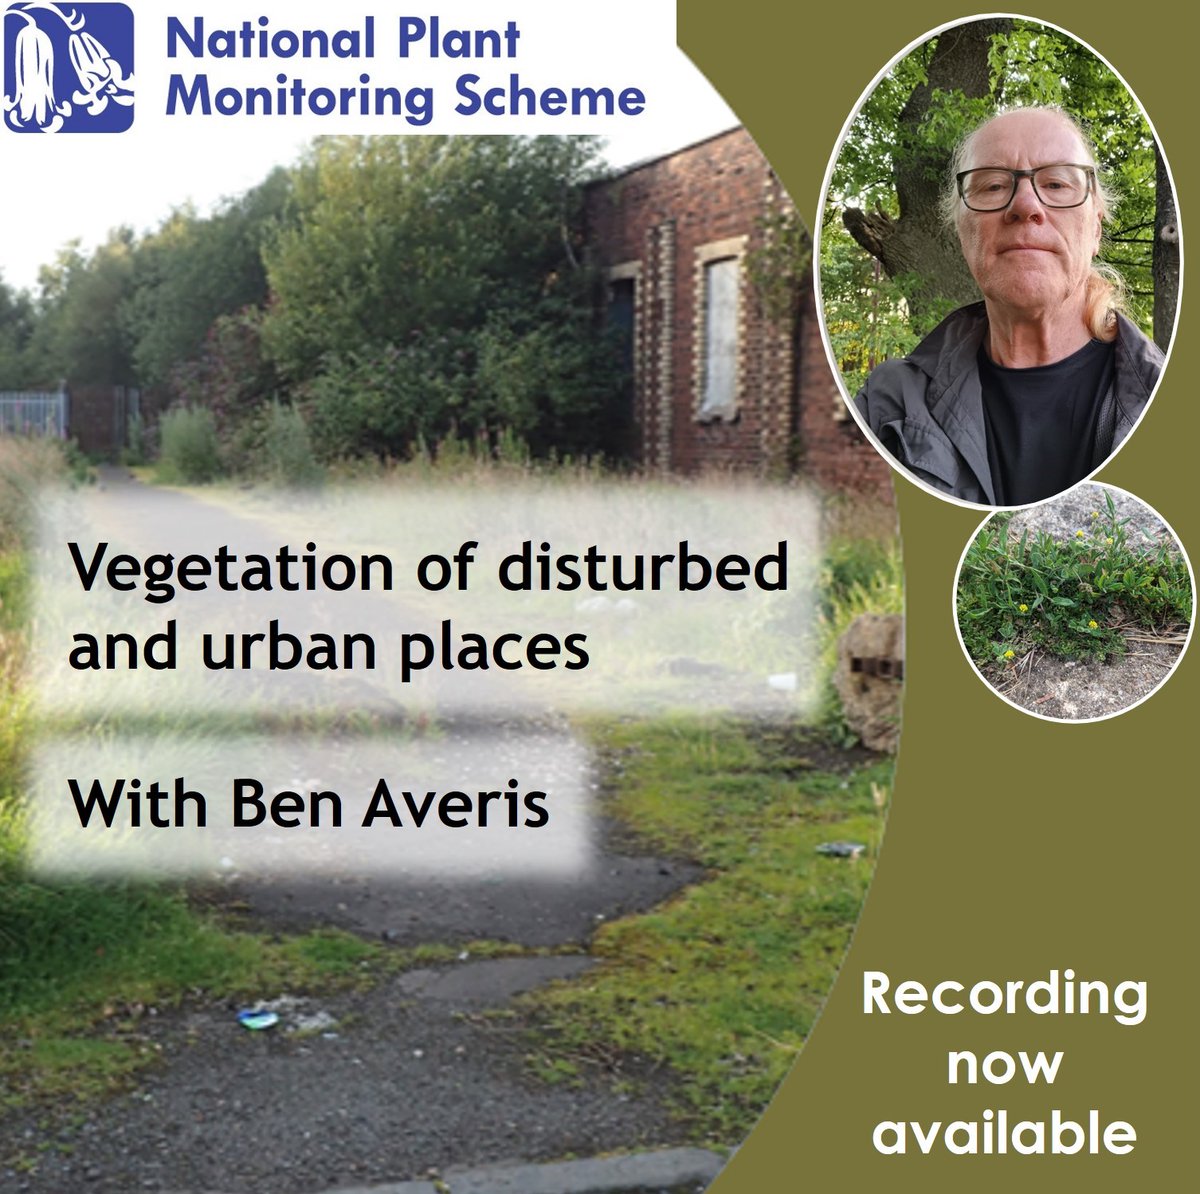 New webinar recordings available on the NPMS YouTube channel ow.ly/Ih5H50QIfp0 If you missed the live sessions, catch up with botanical specialist Ben Averis on vegetation of disturbed urban places, or BSBI's head of science Kevin Walker's intro to the Plant Atlas 2020.